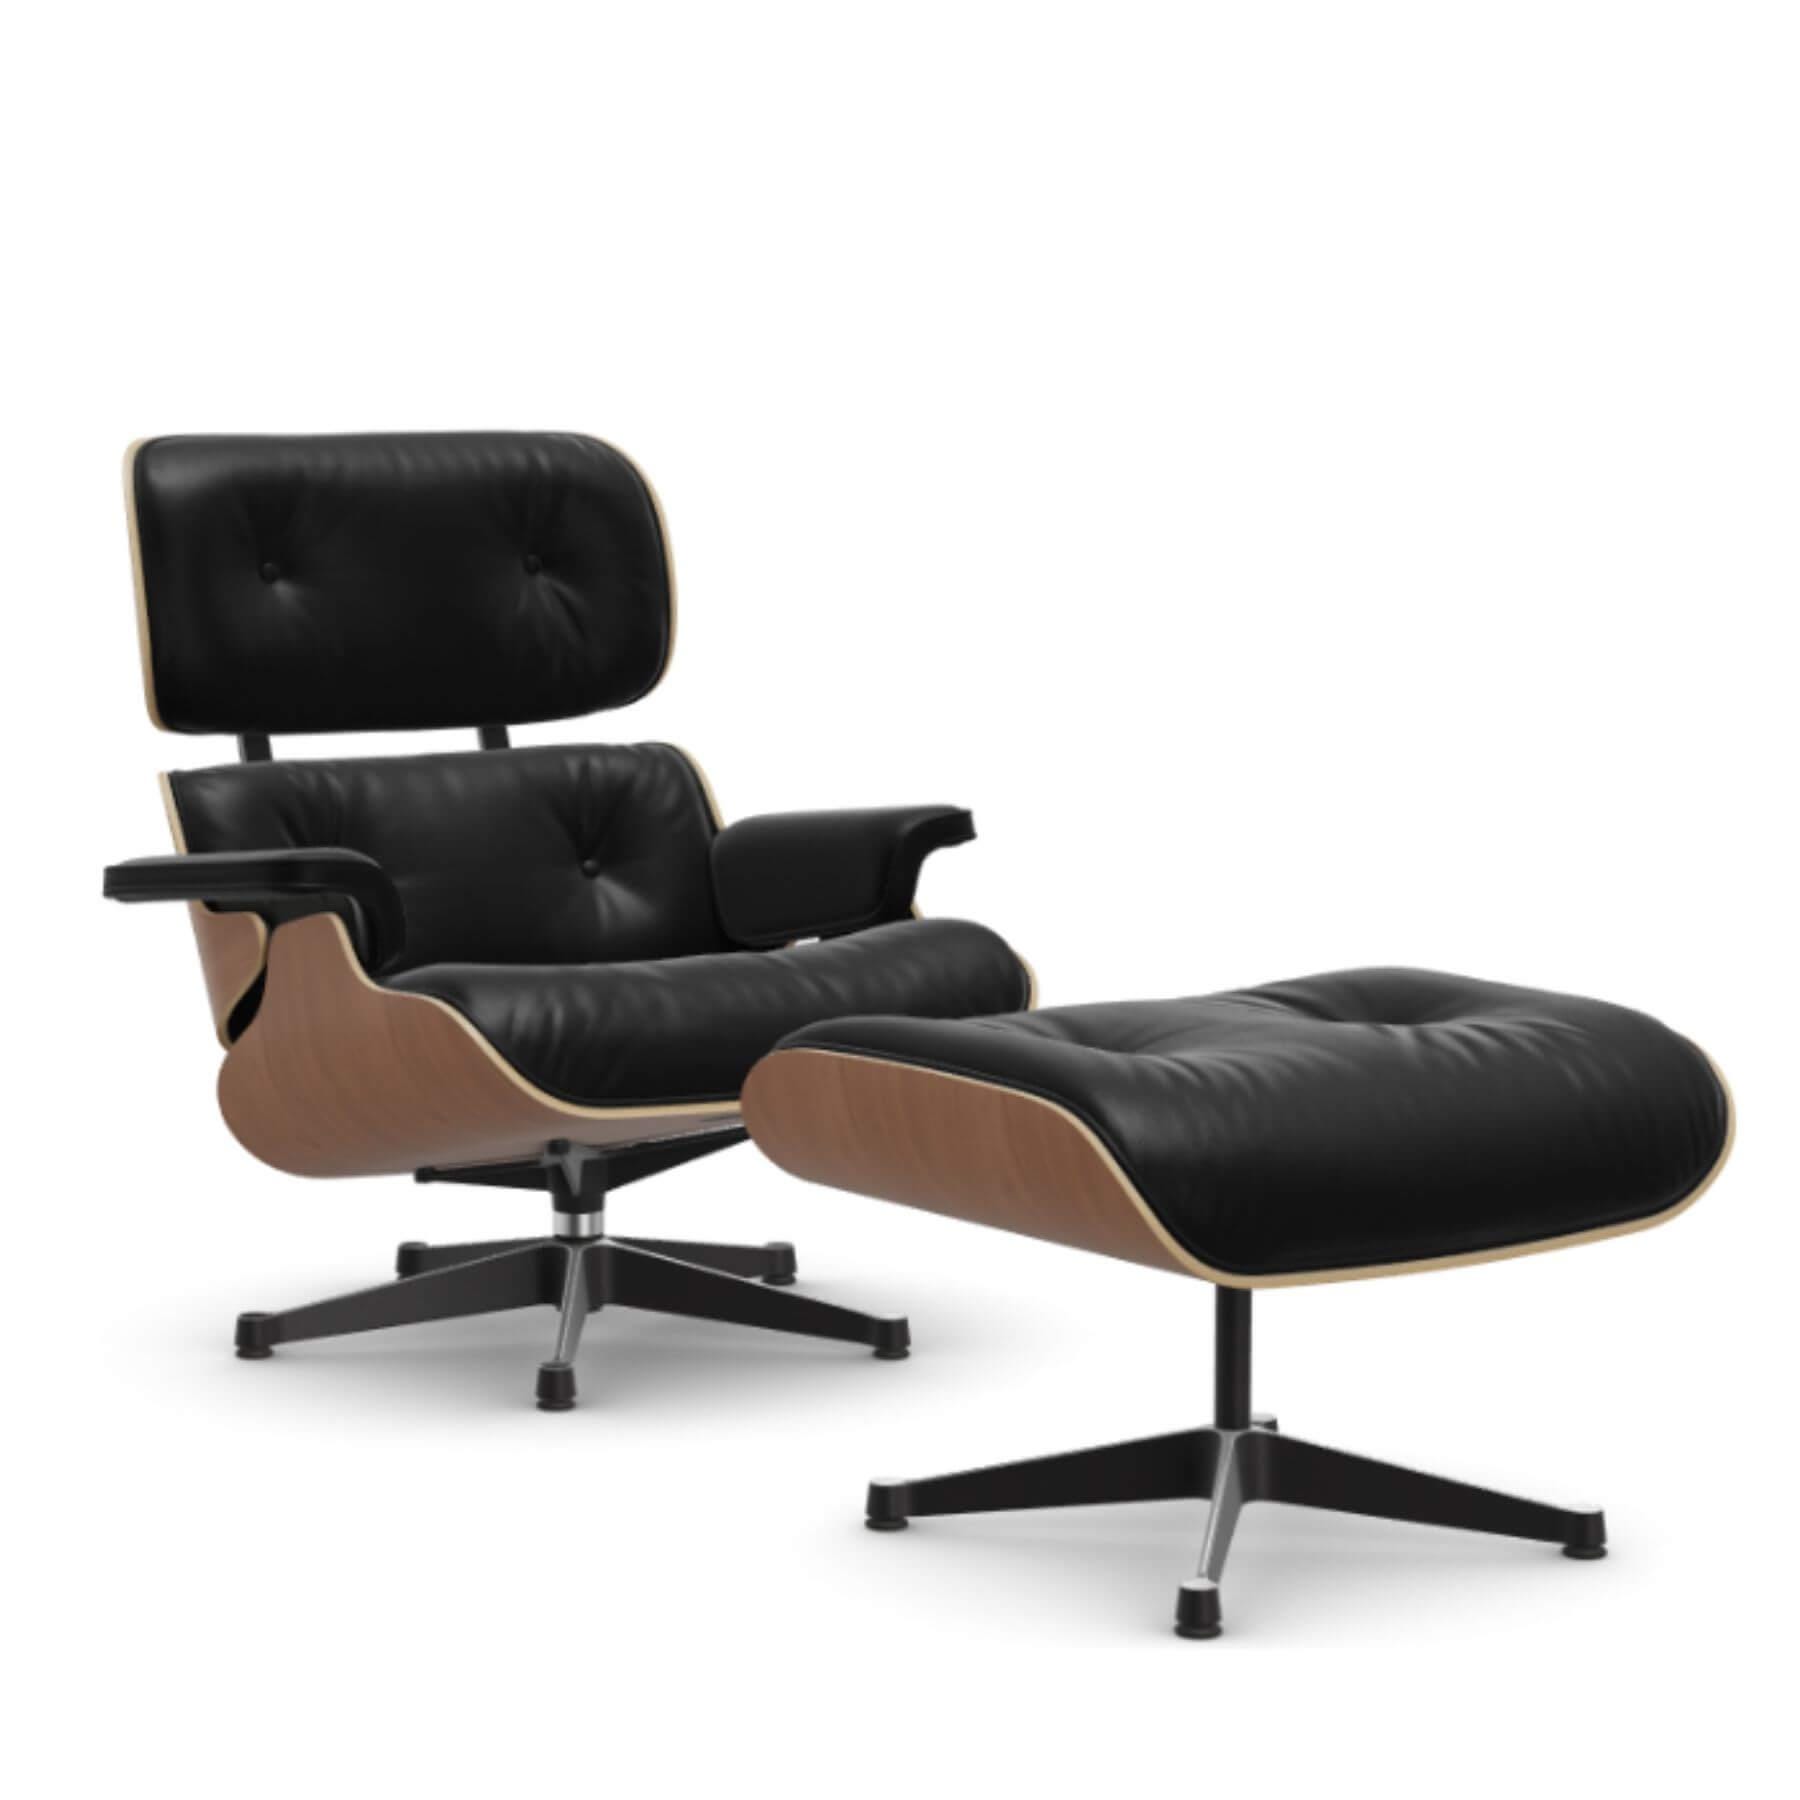 Vitra Eames Classic Lounge Chair American Cherry Nubia Black Anthracite Polished Black With Ottoman Light Wood Designer Furniture From Holloways O